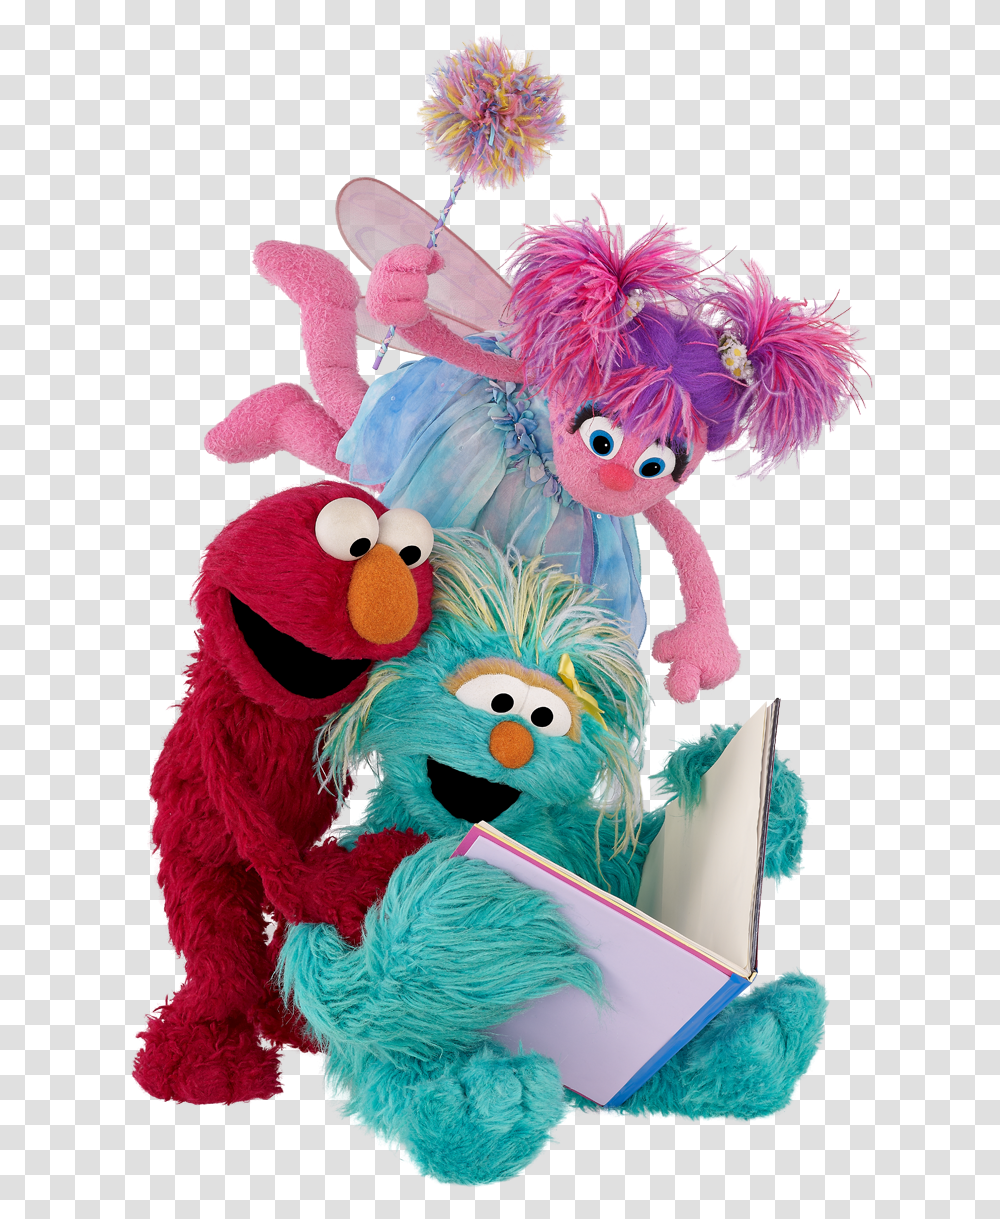 90s Adorable And Baby Image Sesame Street Reading Book, Toy, Costume Transparent Png